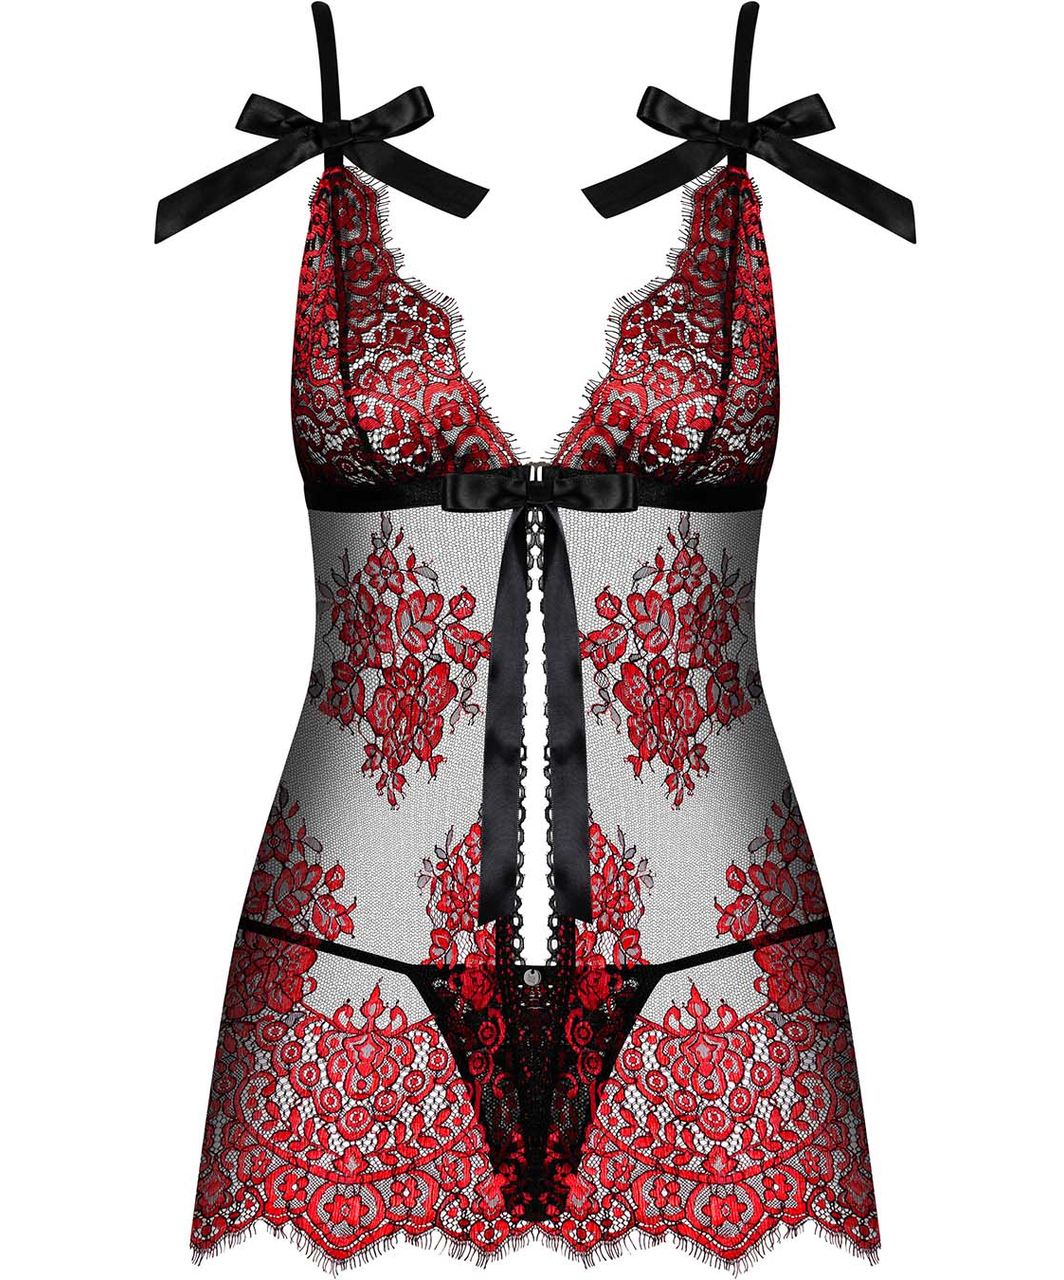 Obsessive Redessia black sheer mesh & red lace peignoir